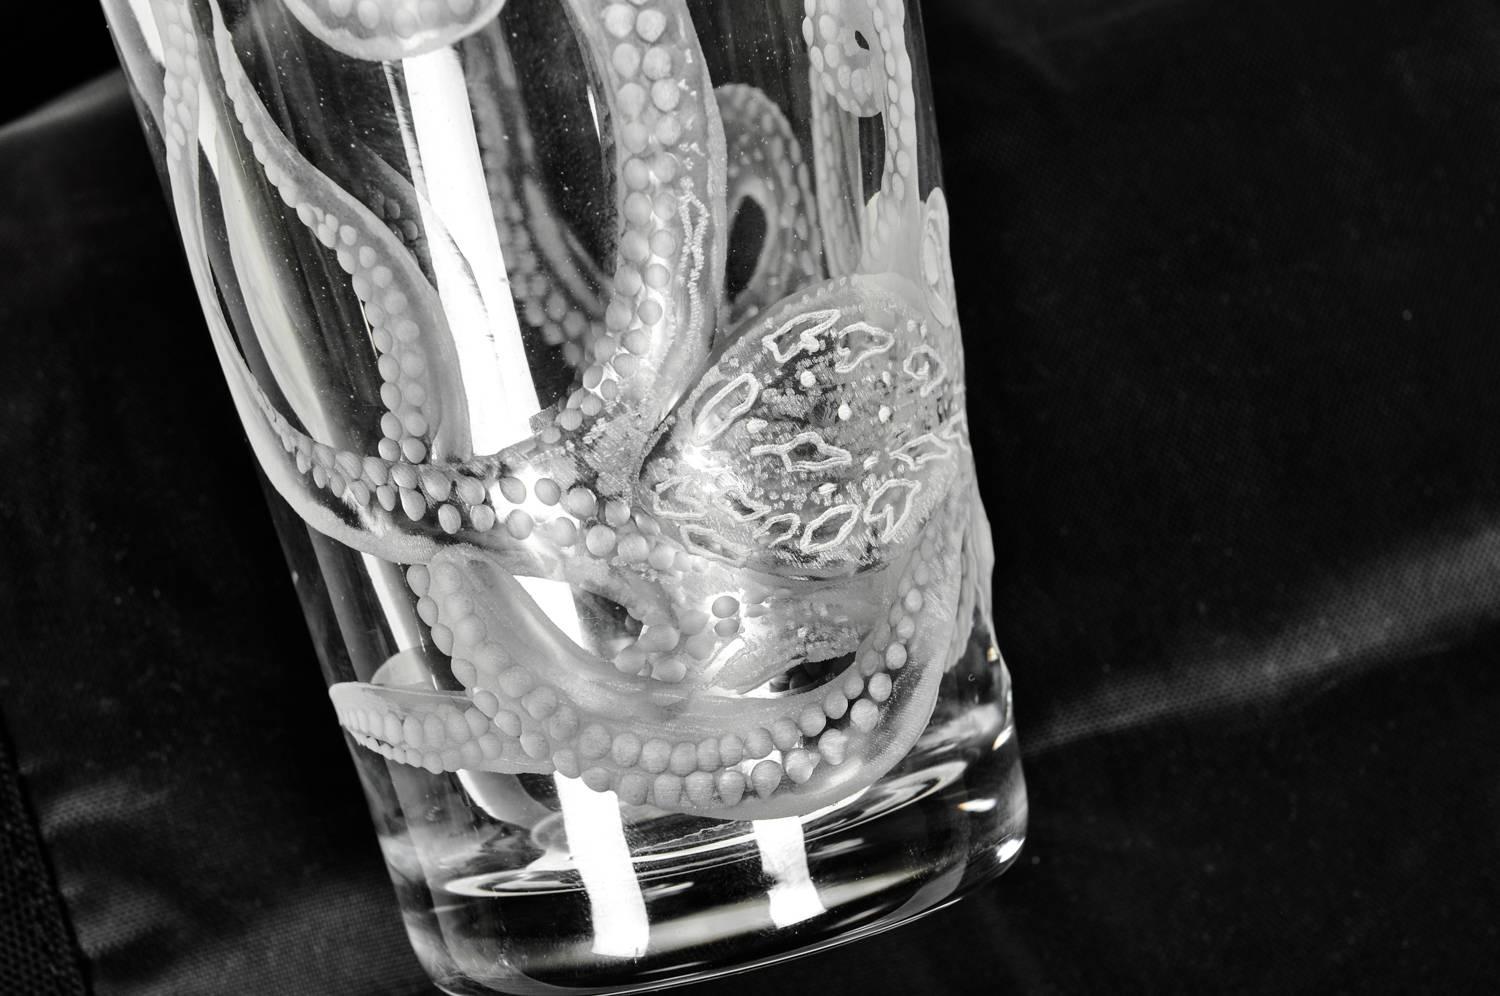 Vintage silver plate cover with cut-glass with octopus design details cocktail shaker. In excellent condition. The shaker measure 8.5 inches high X 3.5 inches diameter.